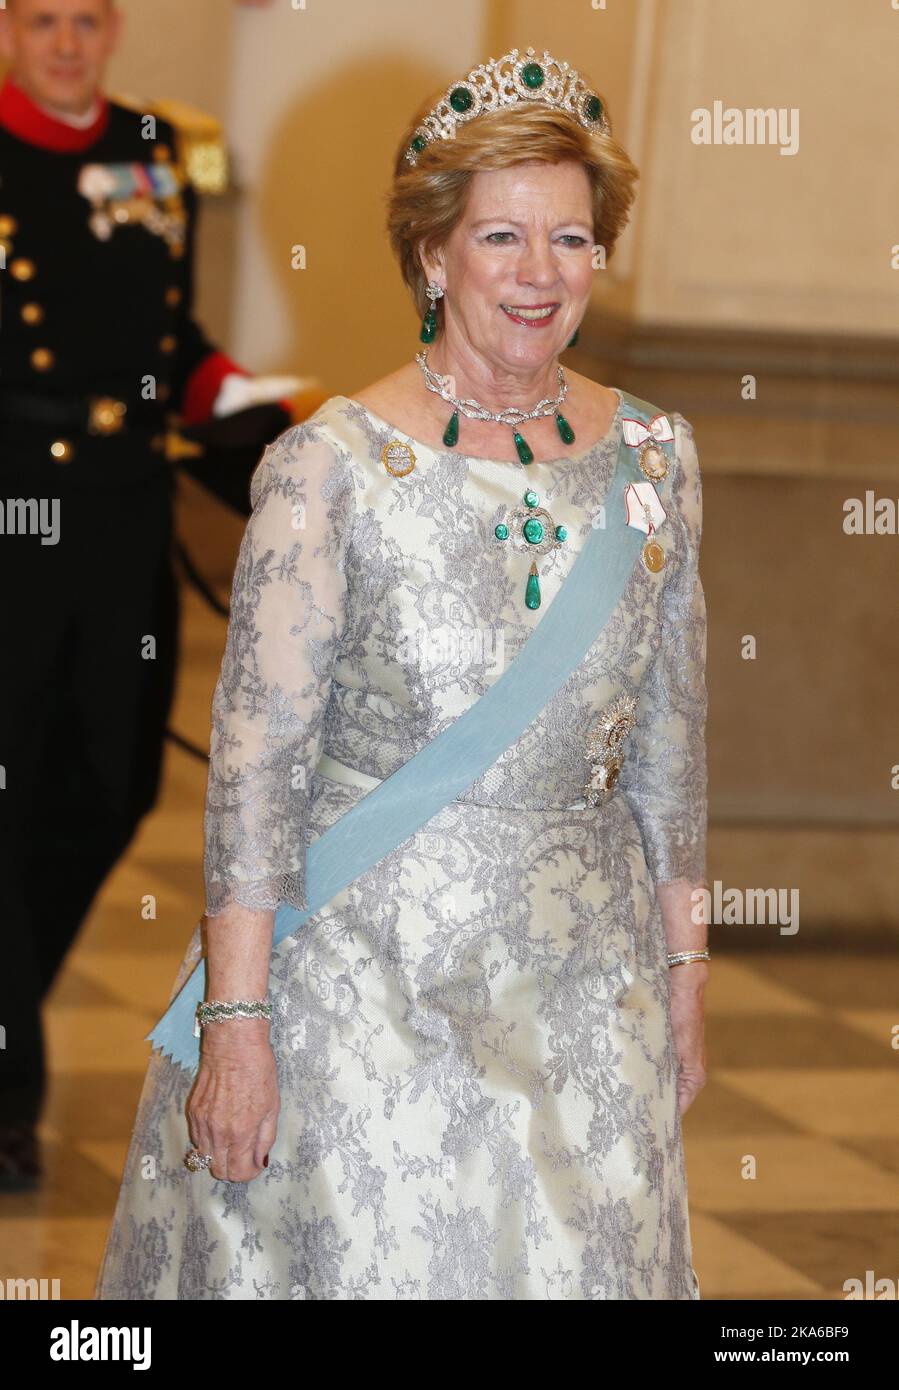 COPENHAGEN, DENMARK 20150415. Ex-King Constantine and Queen Anne-Marie of Greece arrive Christiansborg Palace in Copenhagen, Denmark on Wednesday night in connection with Queen Margrethe's 75th birthday and dinner. Photo: Lise Aaserud / NTB scanpix Stock Photo